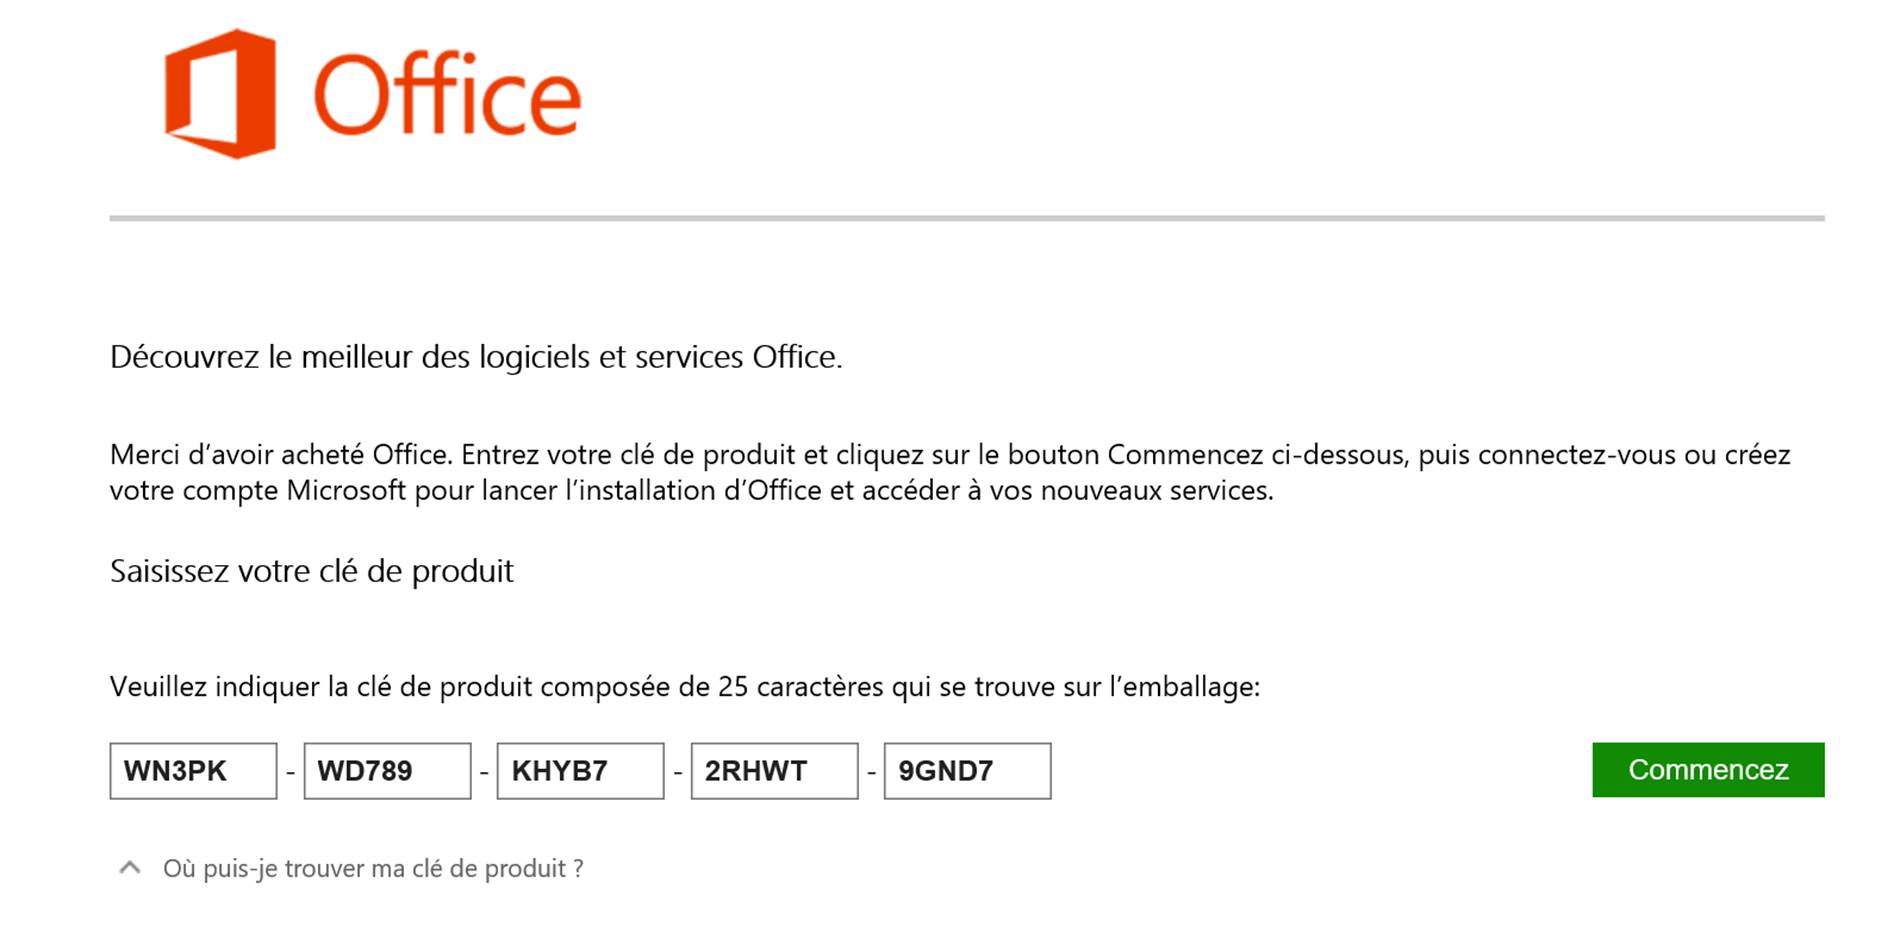 cle d activation microsoft office